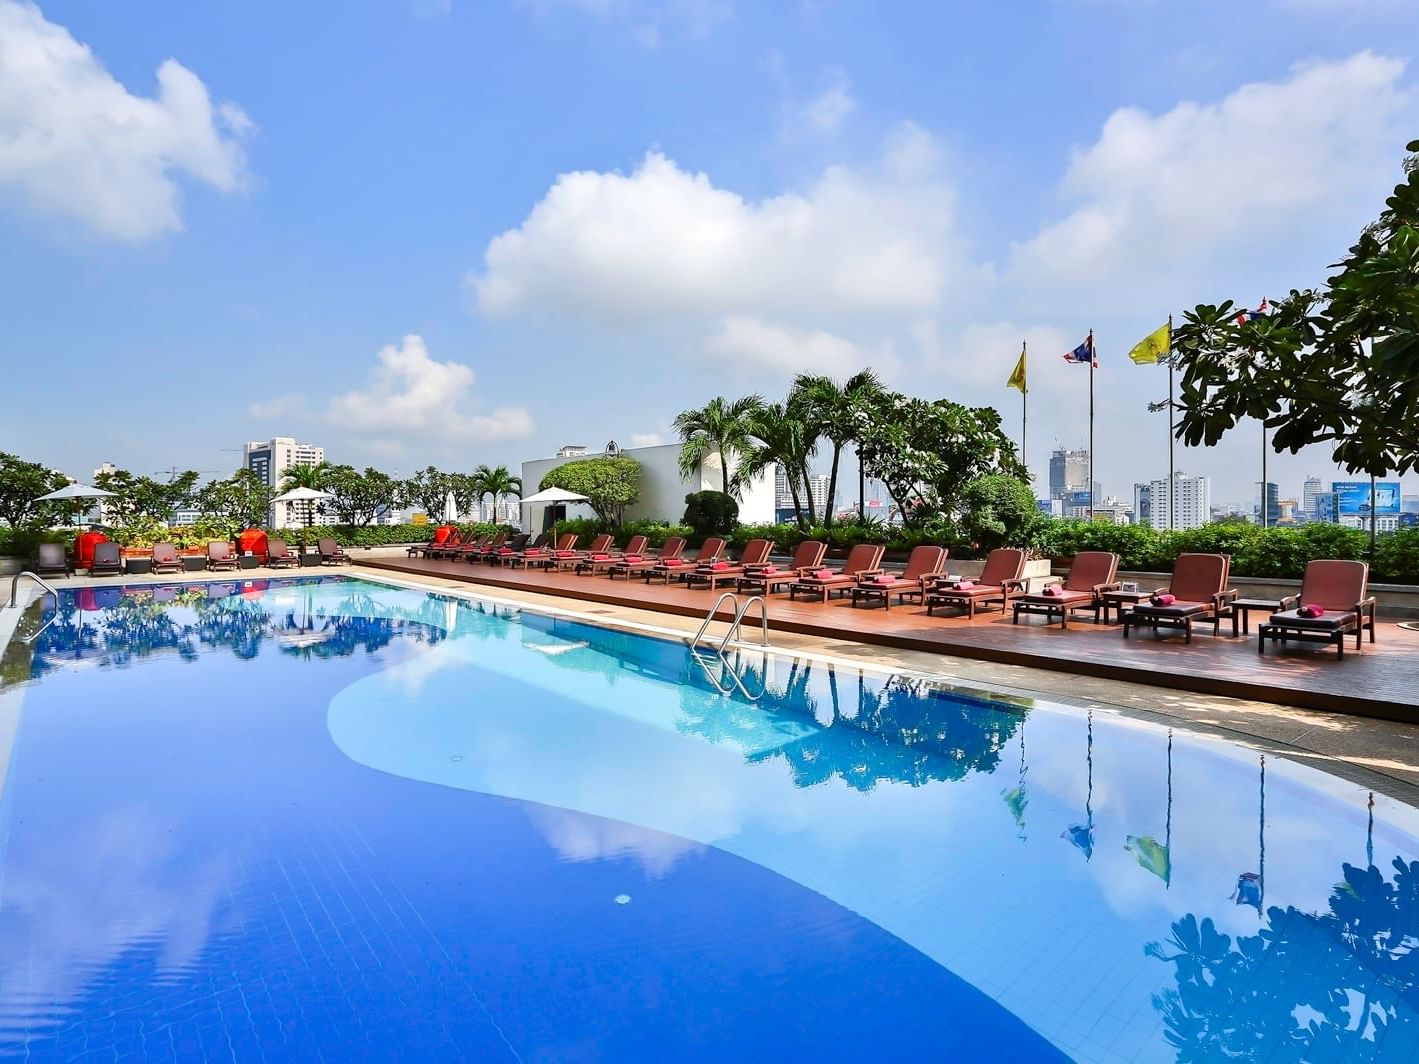 Outdoor swimming pool with lined lounge beds at Eastin Hotels